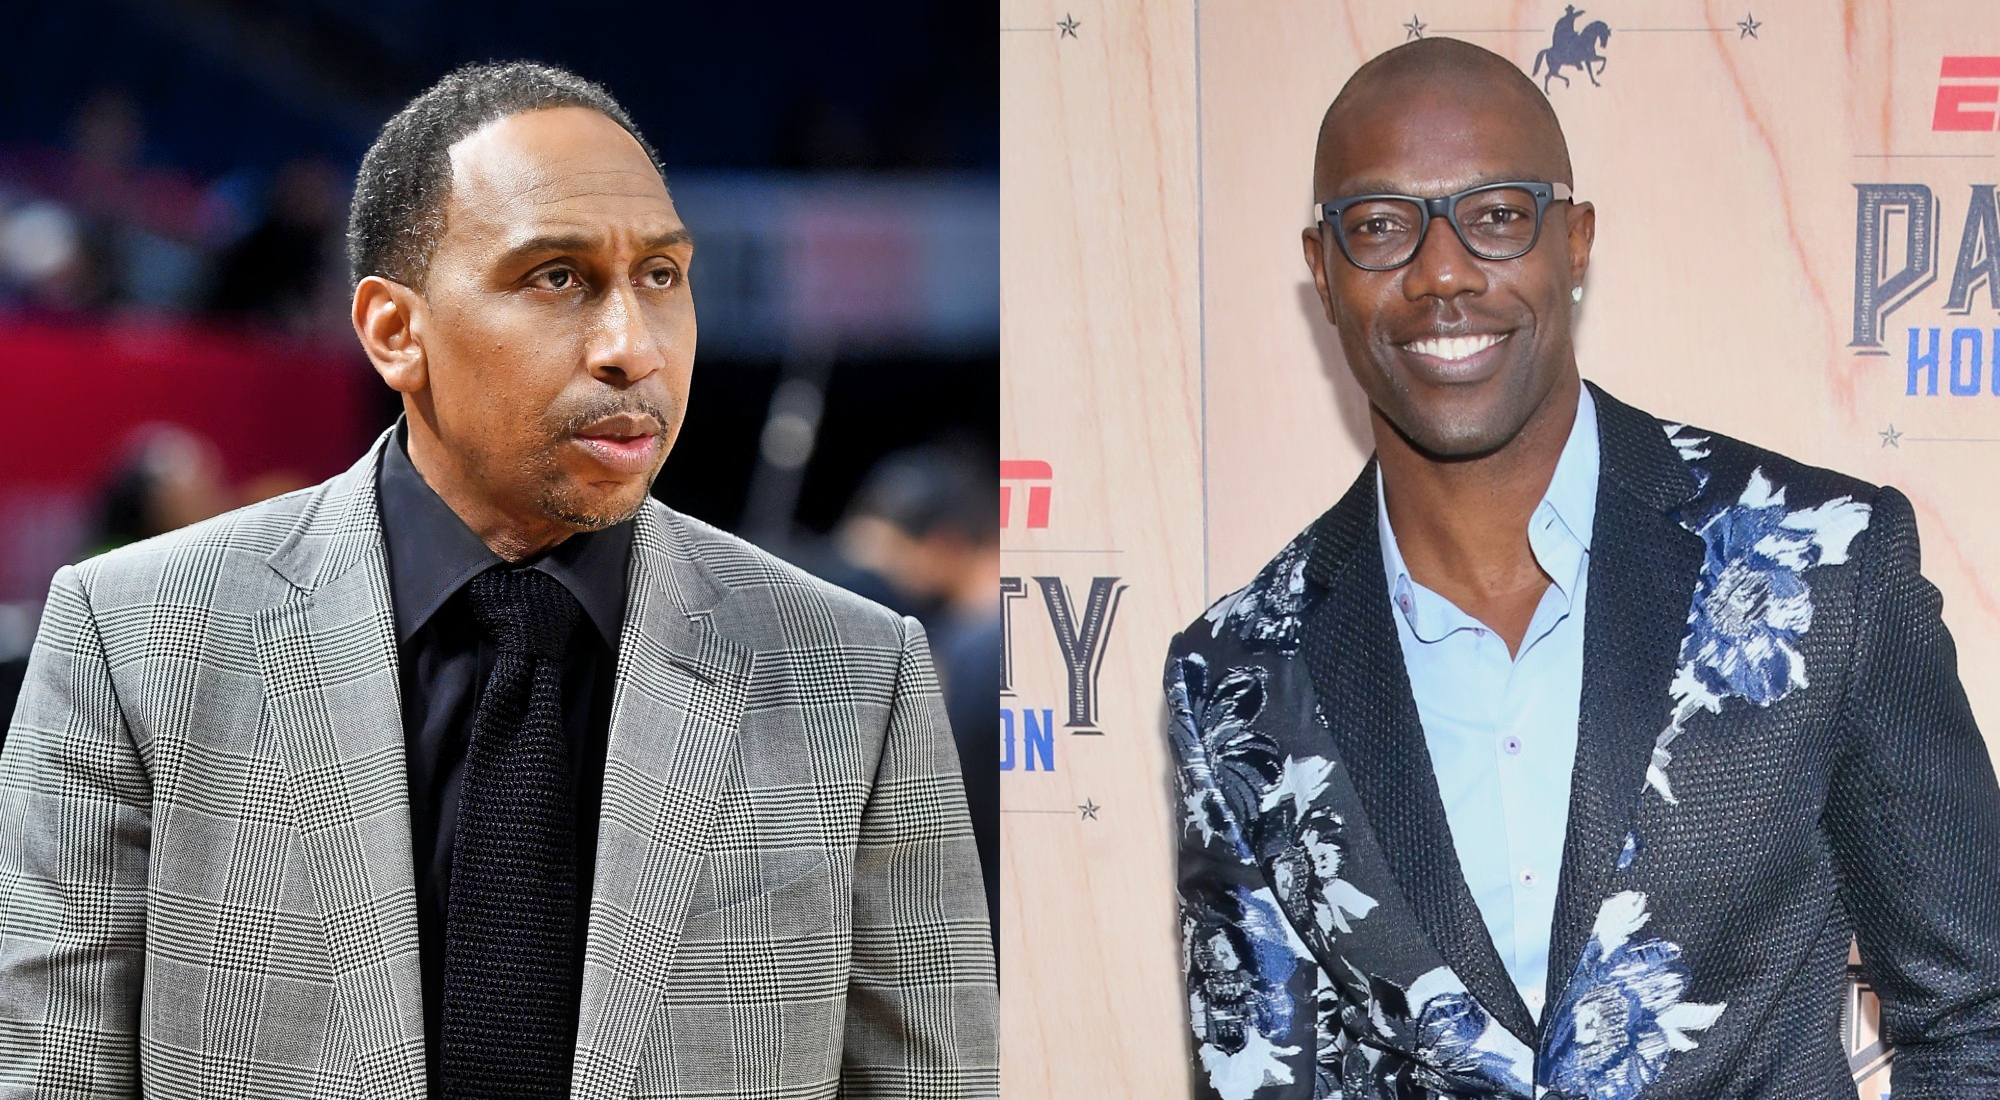 Stephen A. Smith And Terrell Owens Are Beefing Online